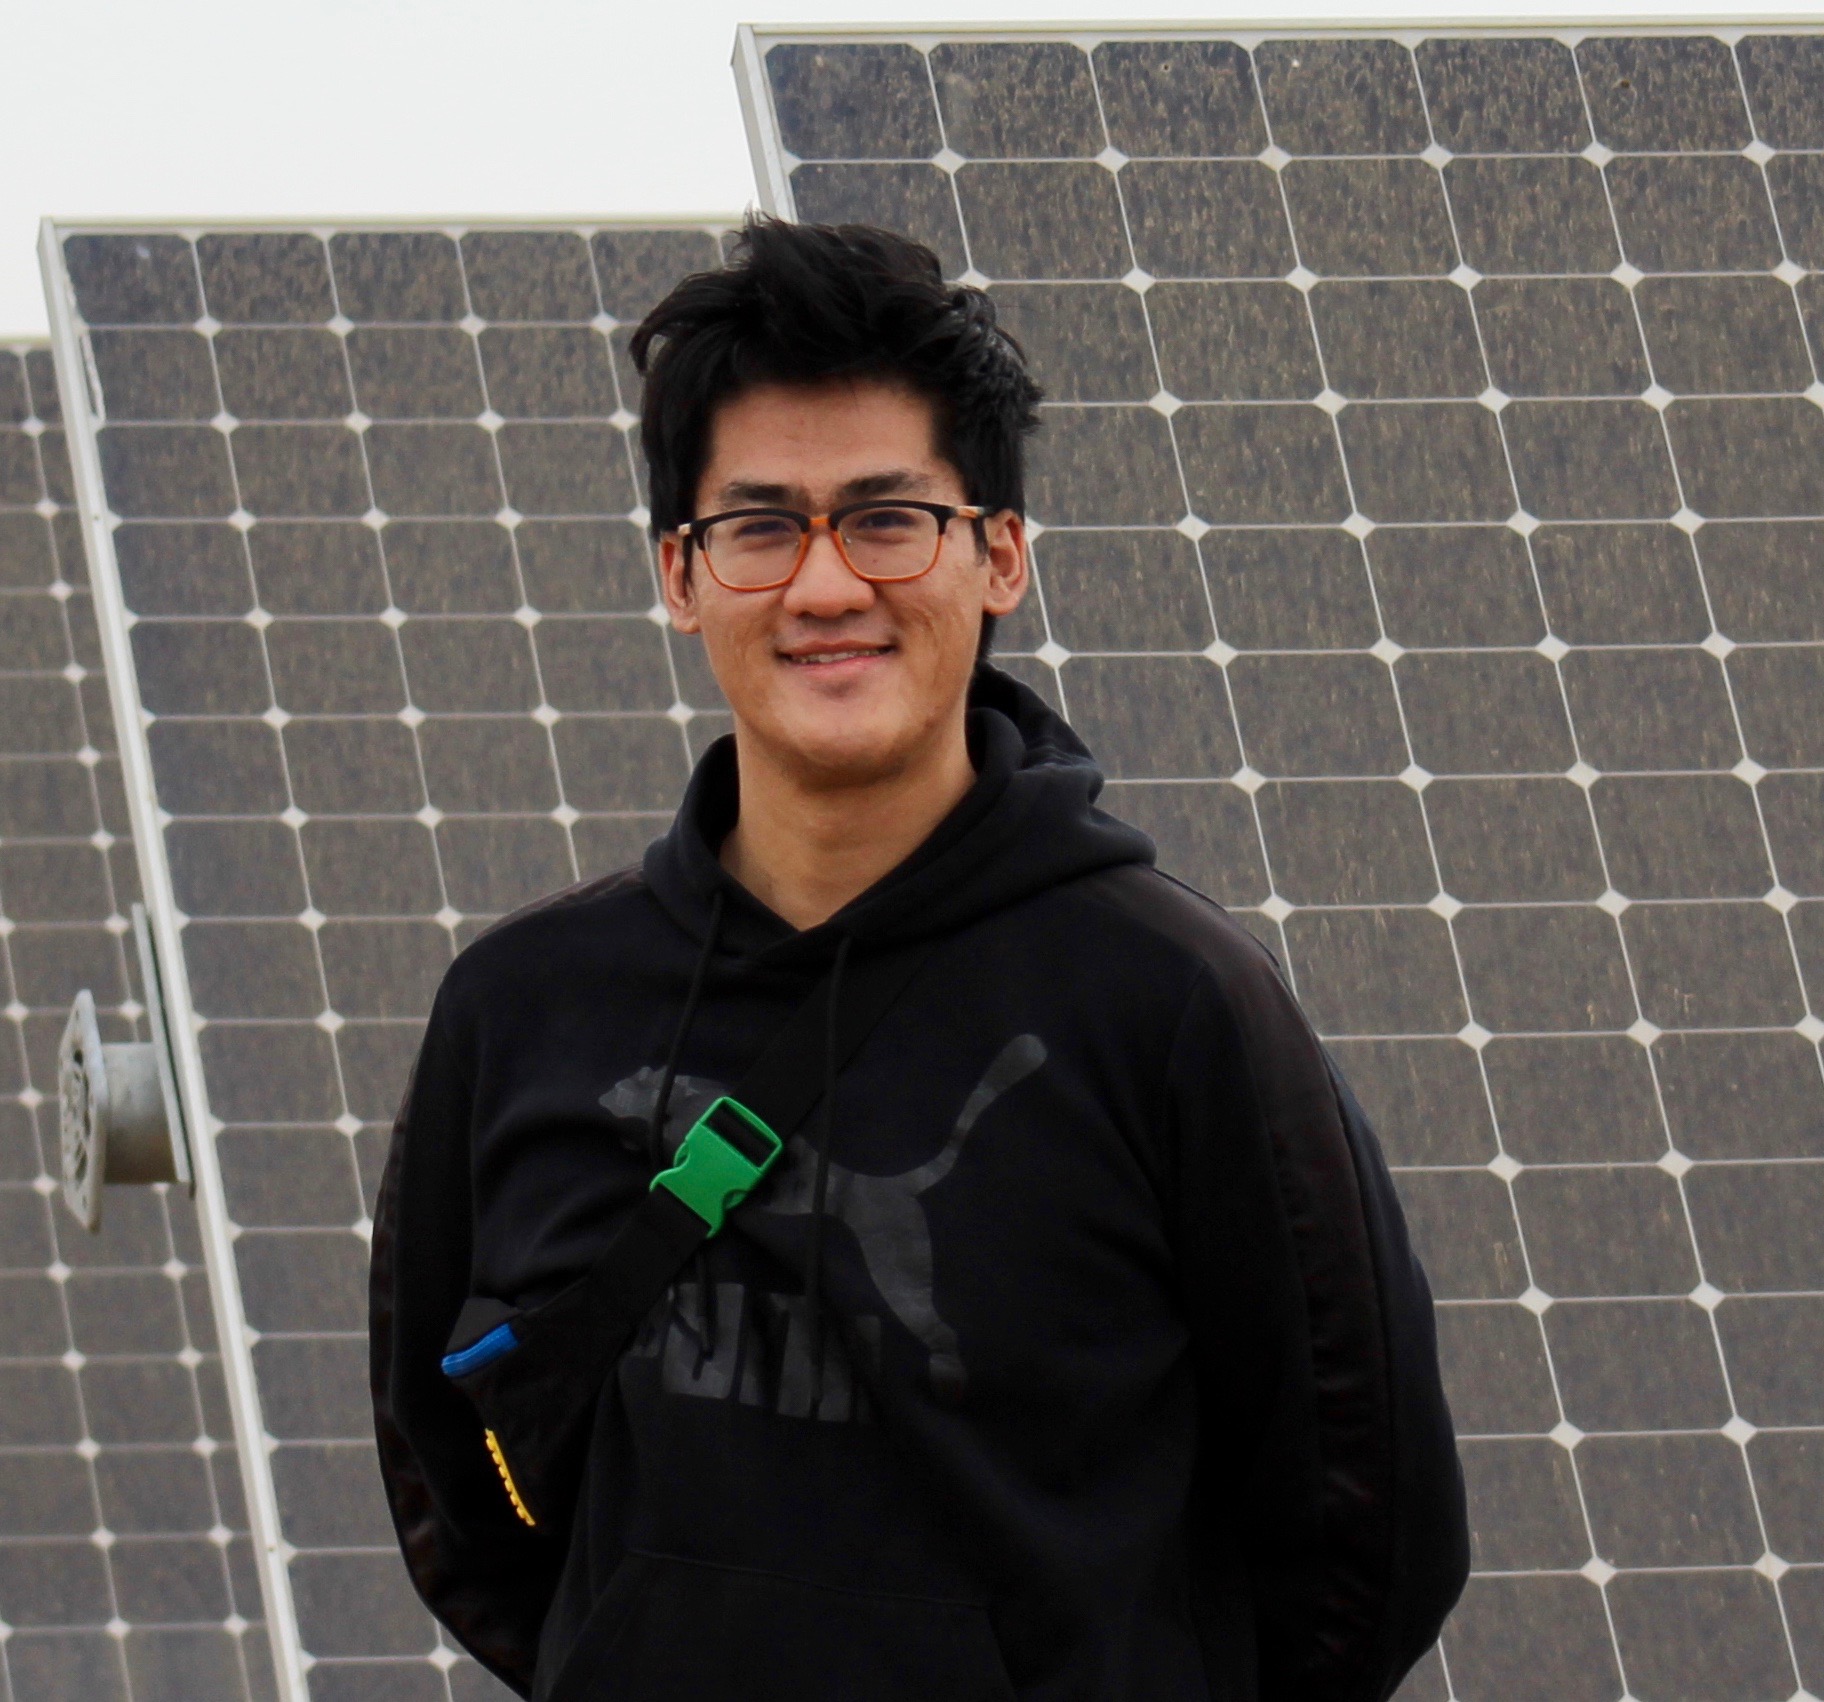 Yudi Li, a UC Davis doctoral student with the Wild Energy Initiative, will be conducting research on the twin benefits of renewable energy and pollinator habitat restoration at the SunPower solar energy site on campus.